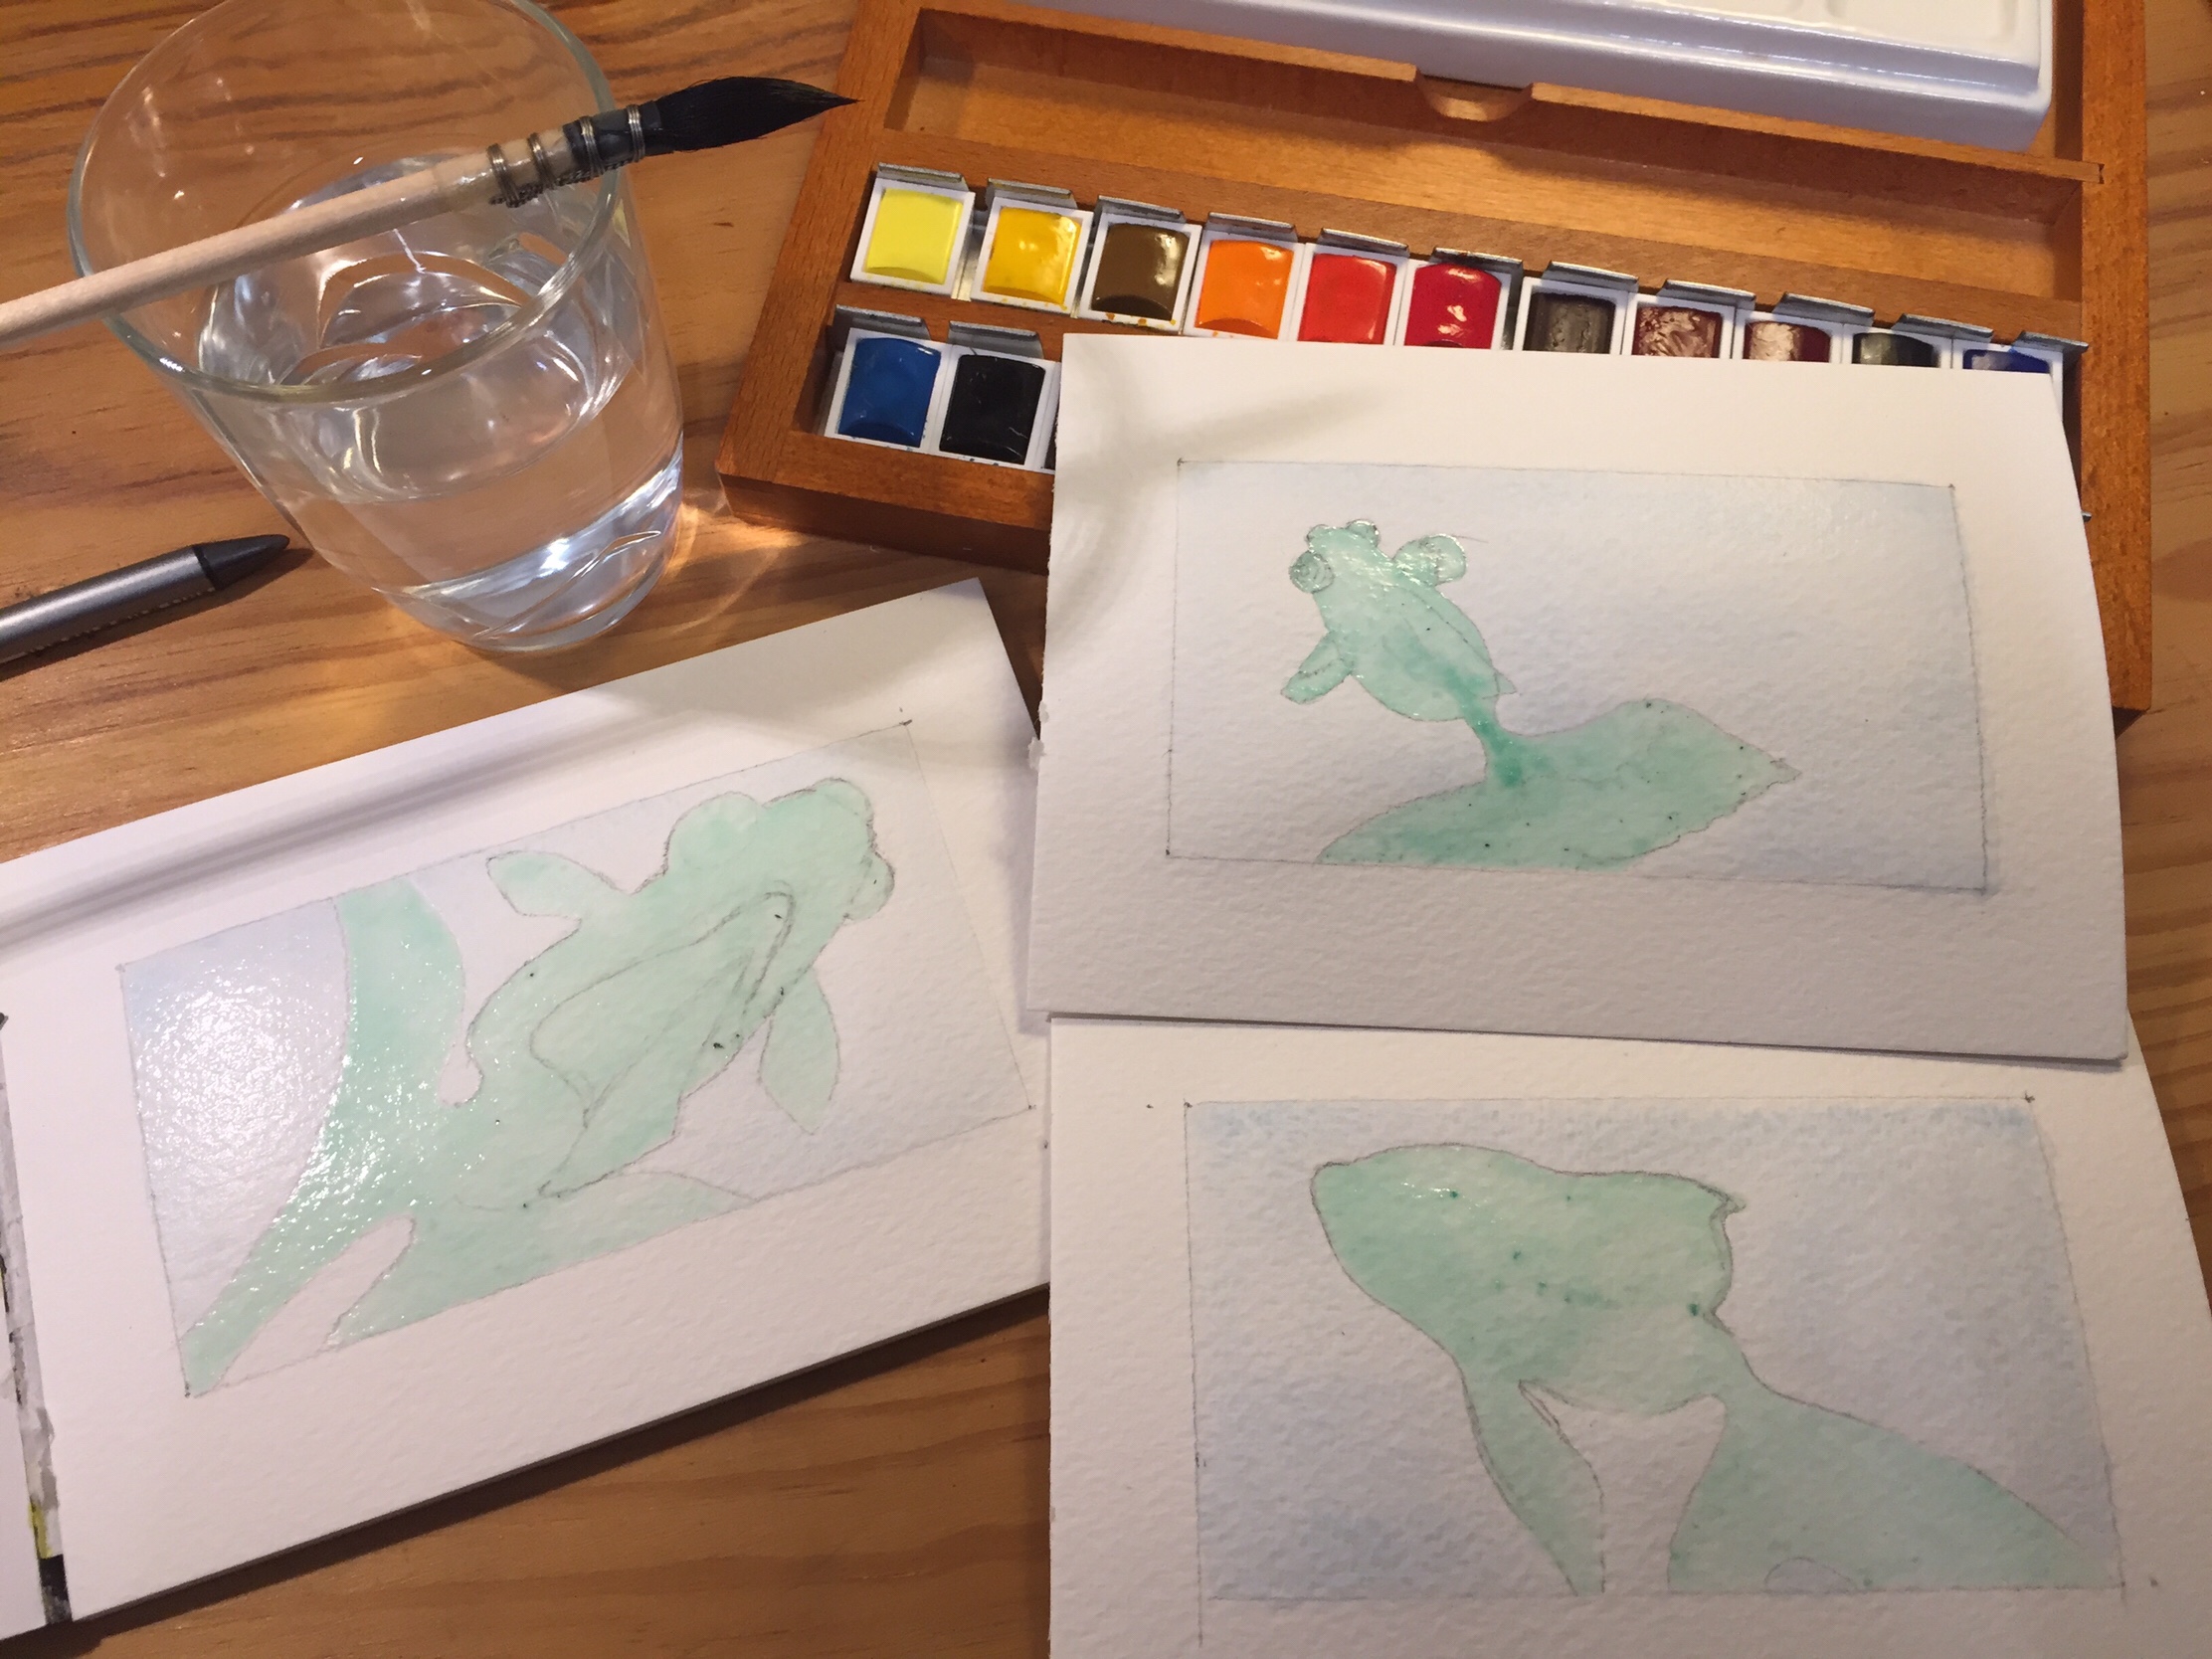 Three postcard sized watercolour sheets where I drew the shapes of goldfish and painted the background in light blue. The watercolour pans, brush and water glass are visible.